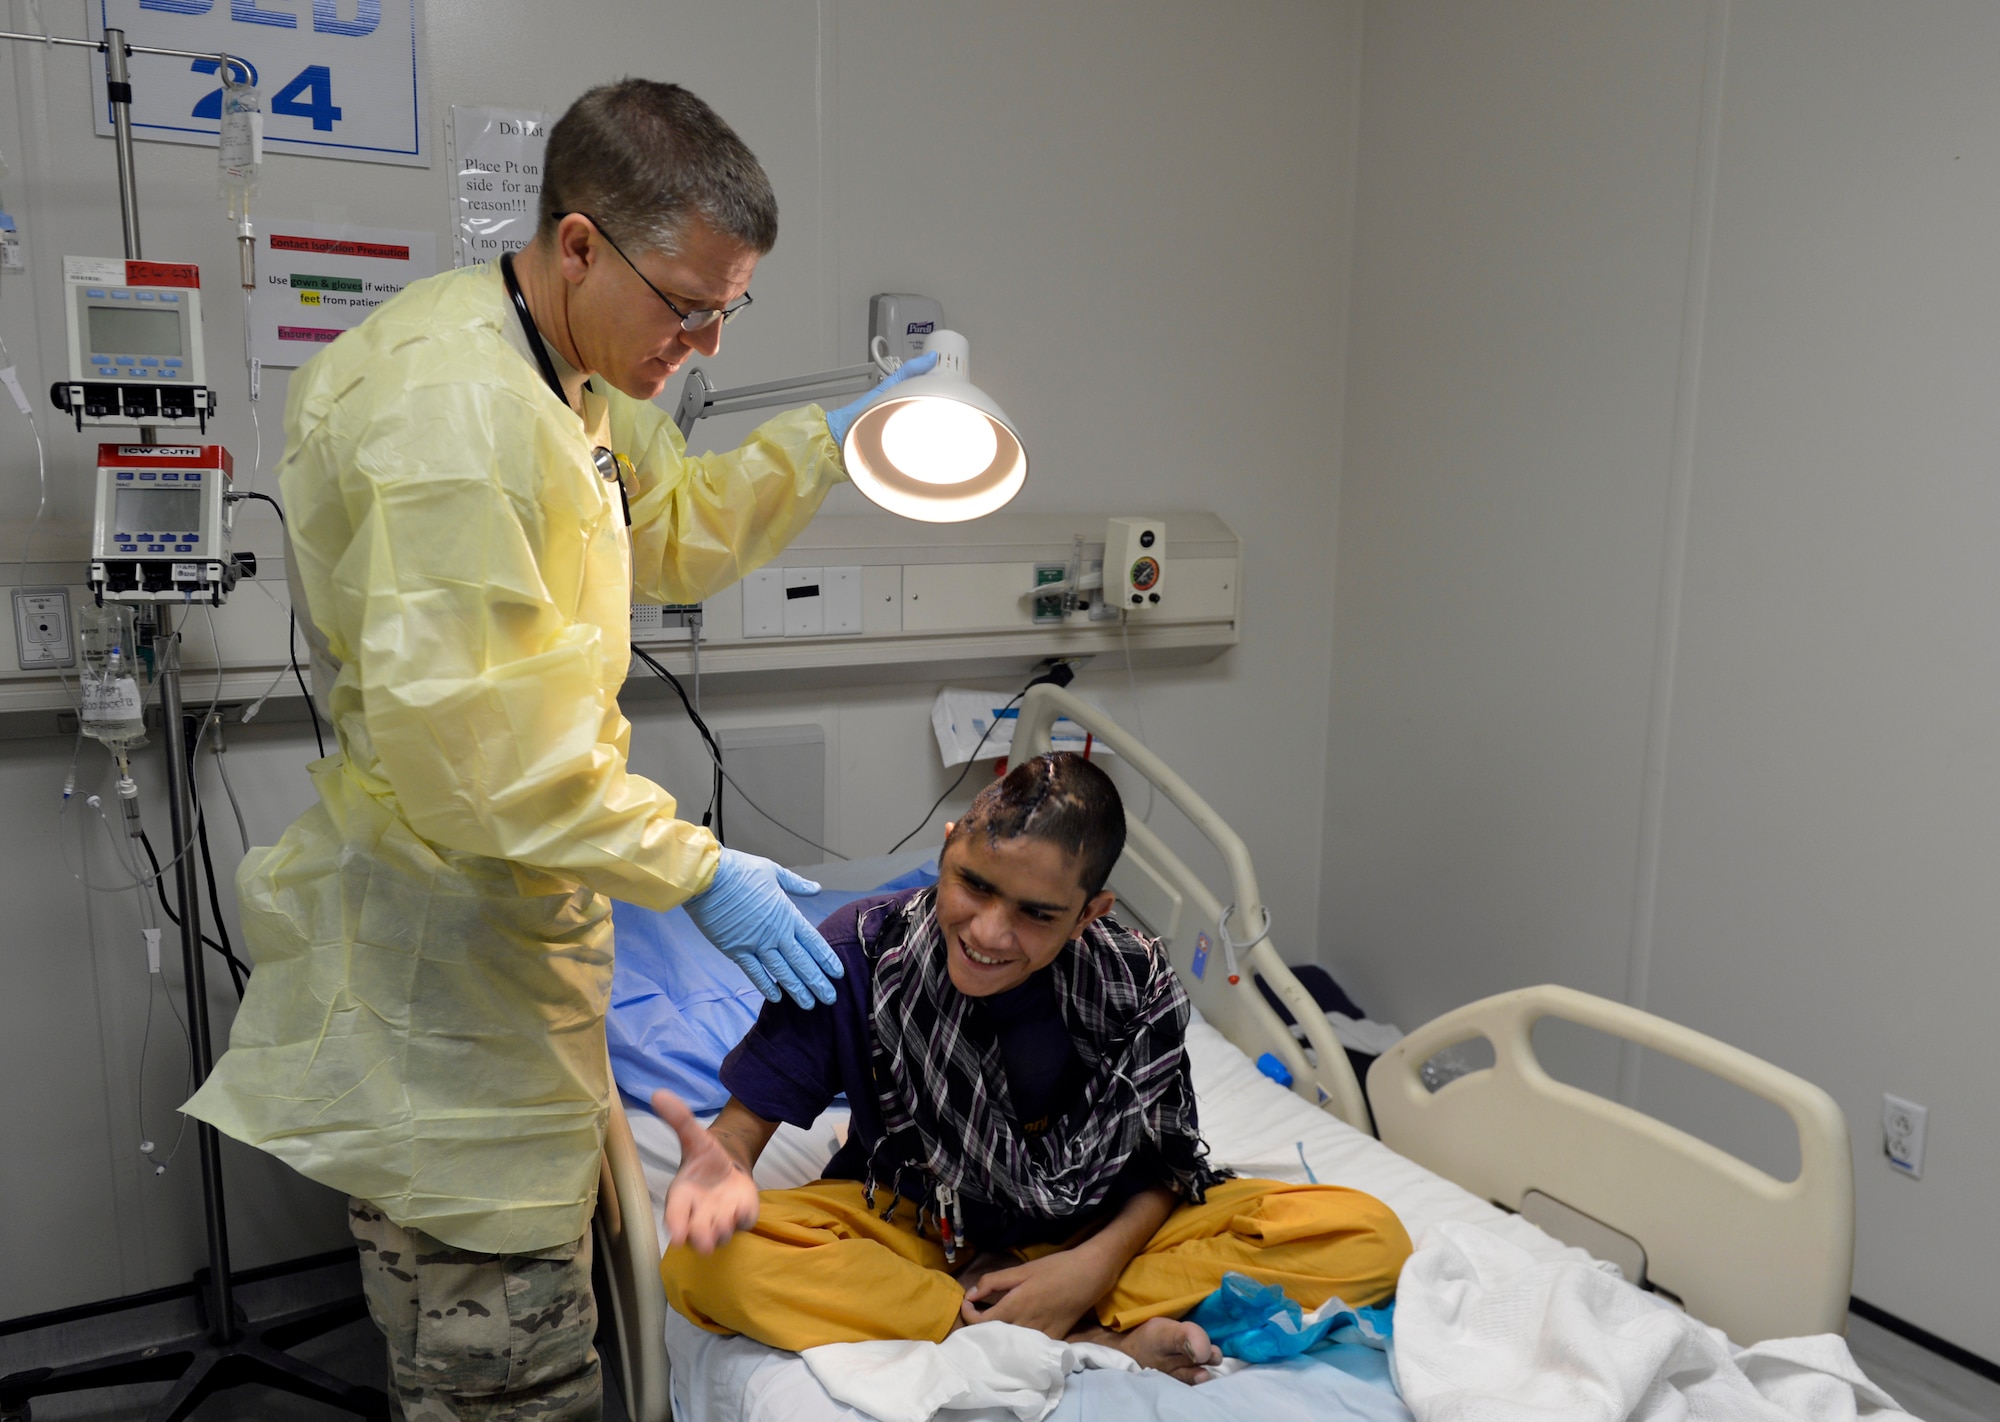 Lt. Col. David Jones, 455th Expeditionary Medical Group pediatrician, prepares to examine a 12-year-old boy’s head in the Craig Joint Theater Hospital on Bagram Airfield, Afghanistan, Oct. 20. The boy recently had a surgery to remove infected skull and brain abscesses.  Jones is a native of San Antonio, Texas. (U.S. Air Force photo/ Staff Sgt. Stephenie Wade)